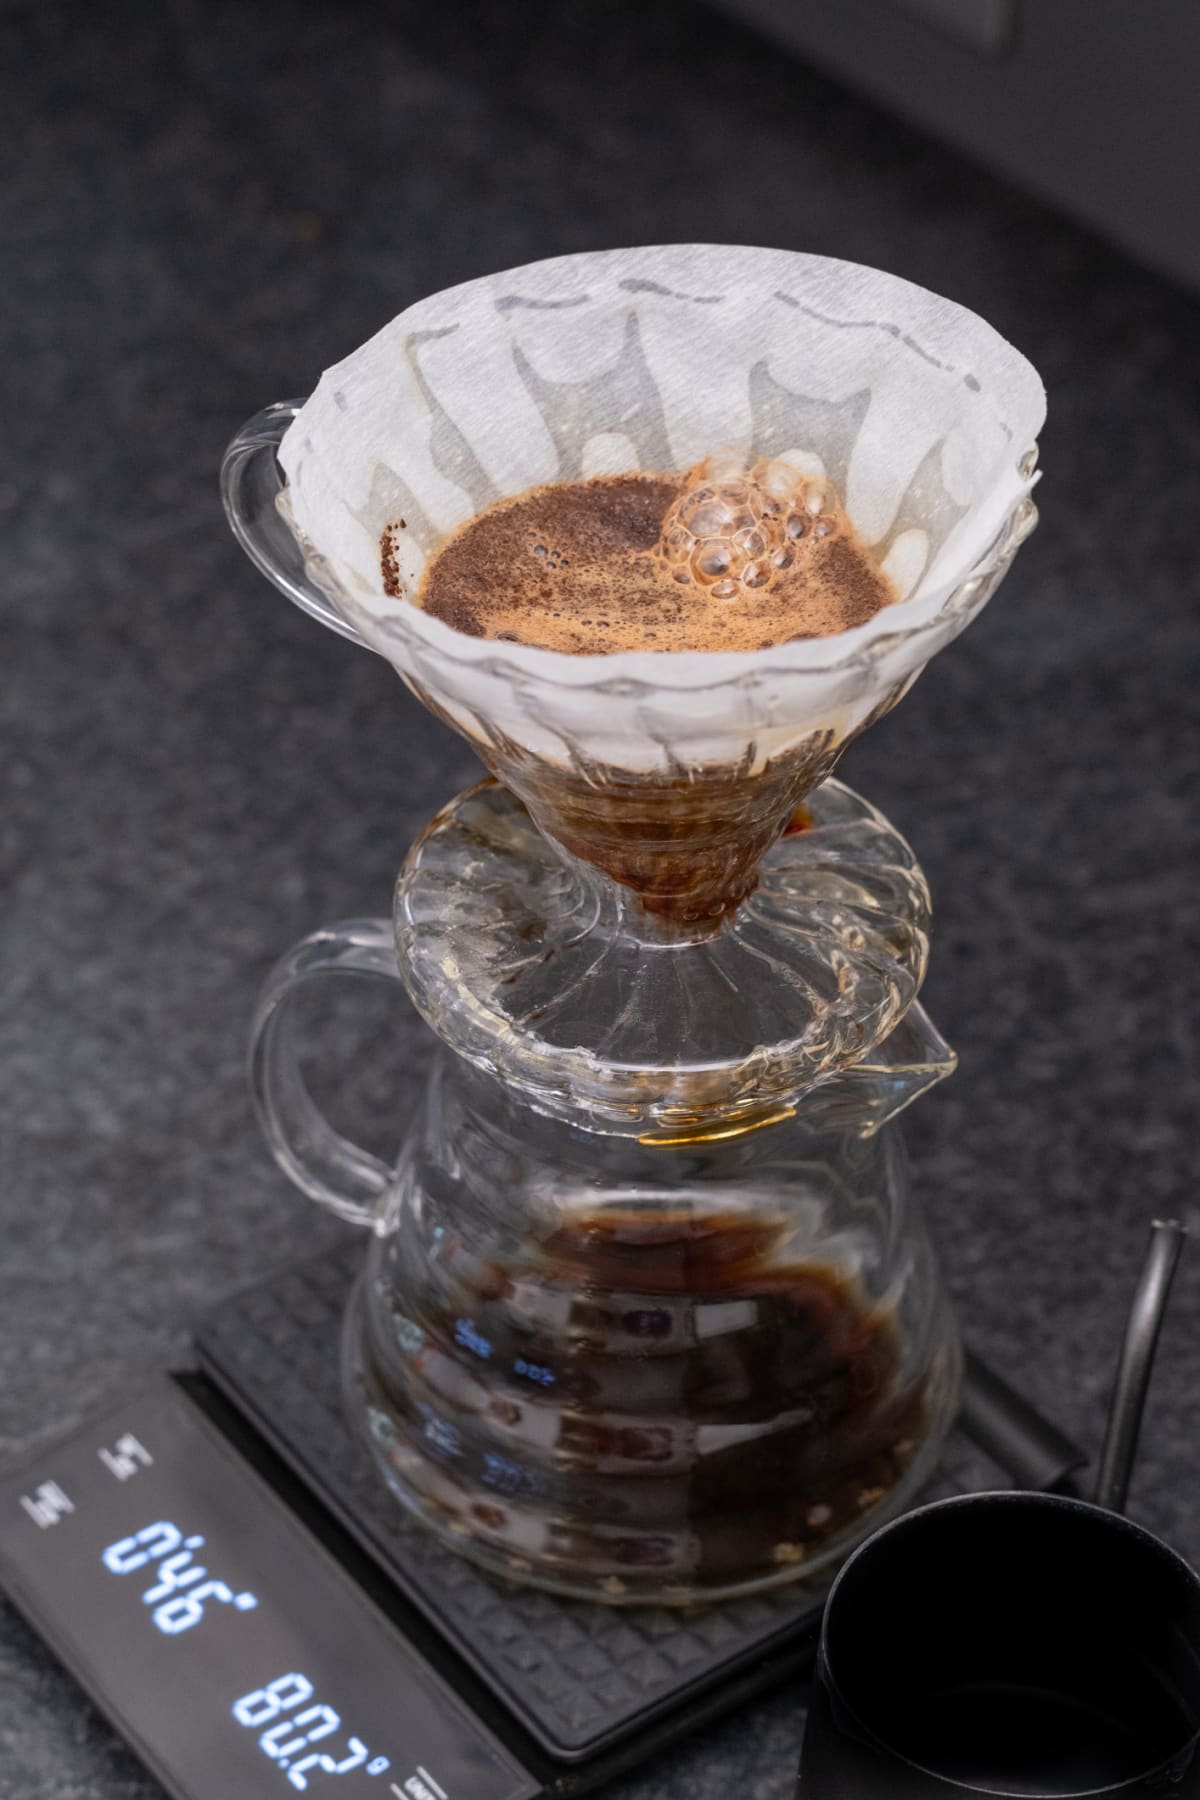 Pour-over coffee maker on a kitchen scale